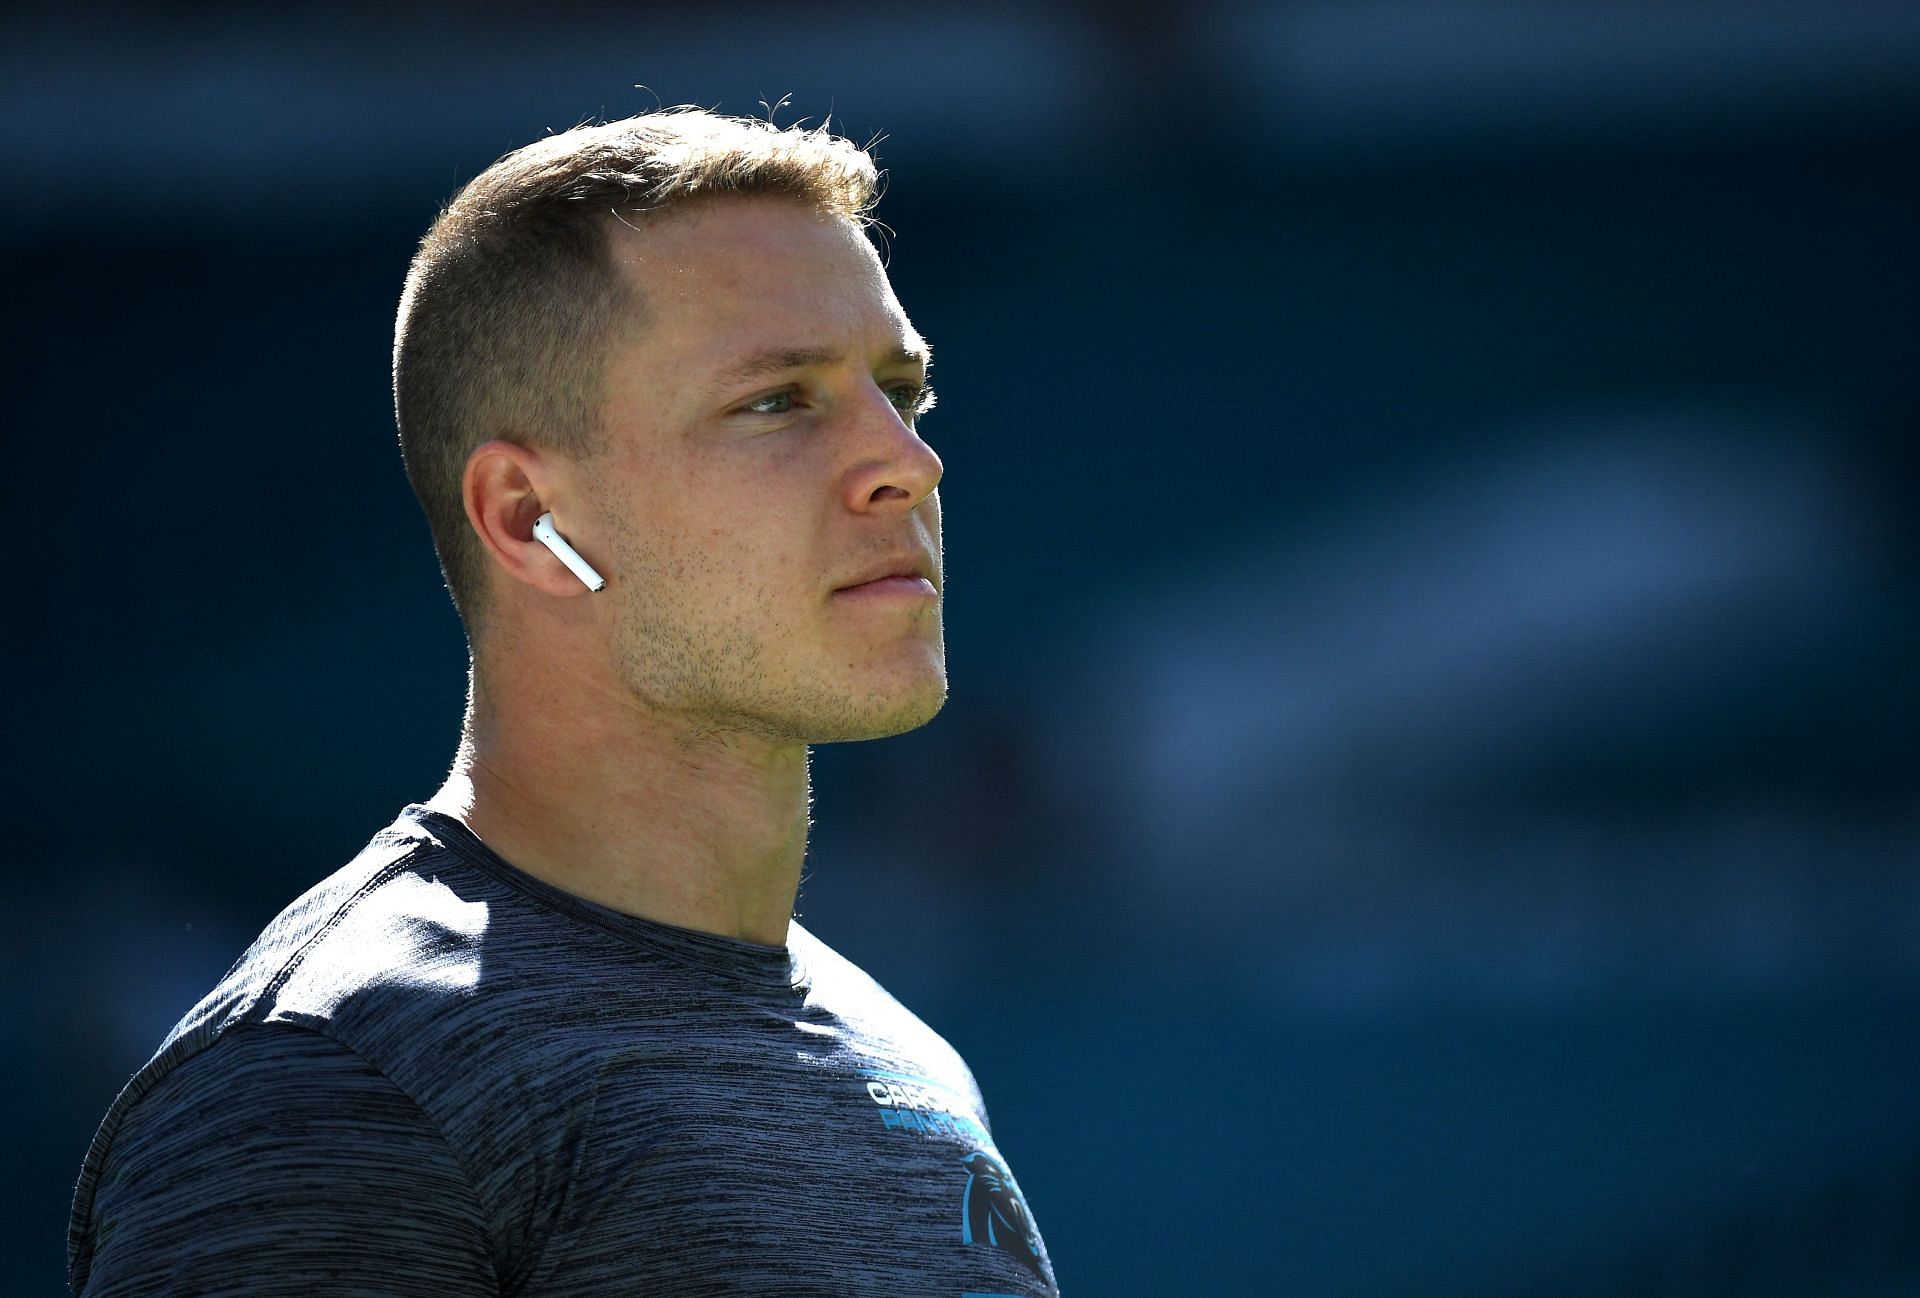 Christian McCaffrey plays for the Carolina Panthers in NFL